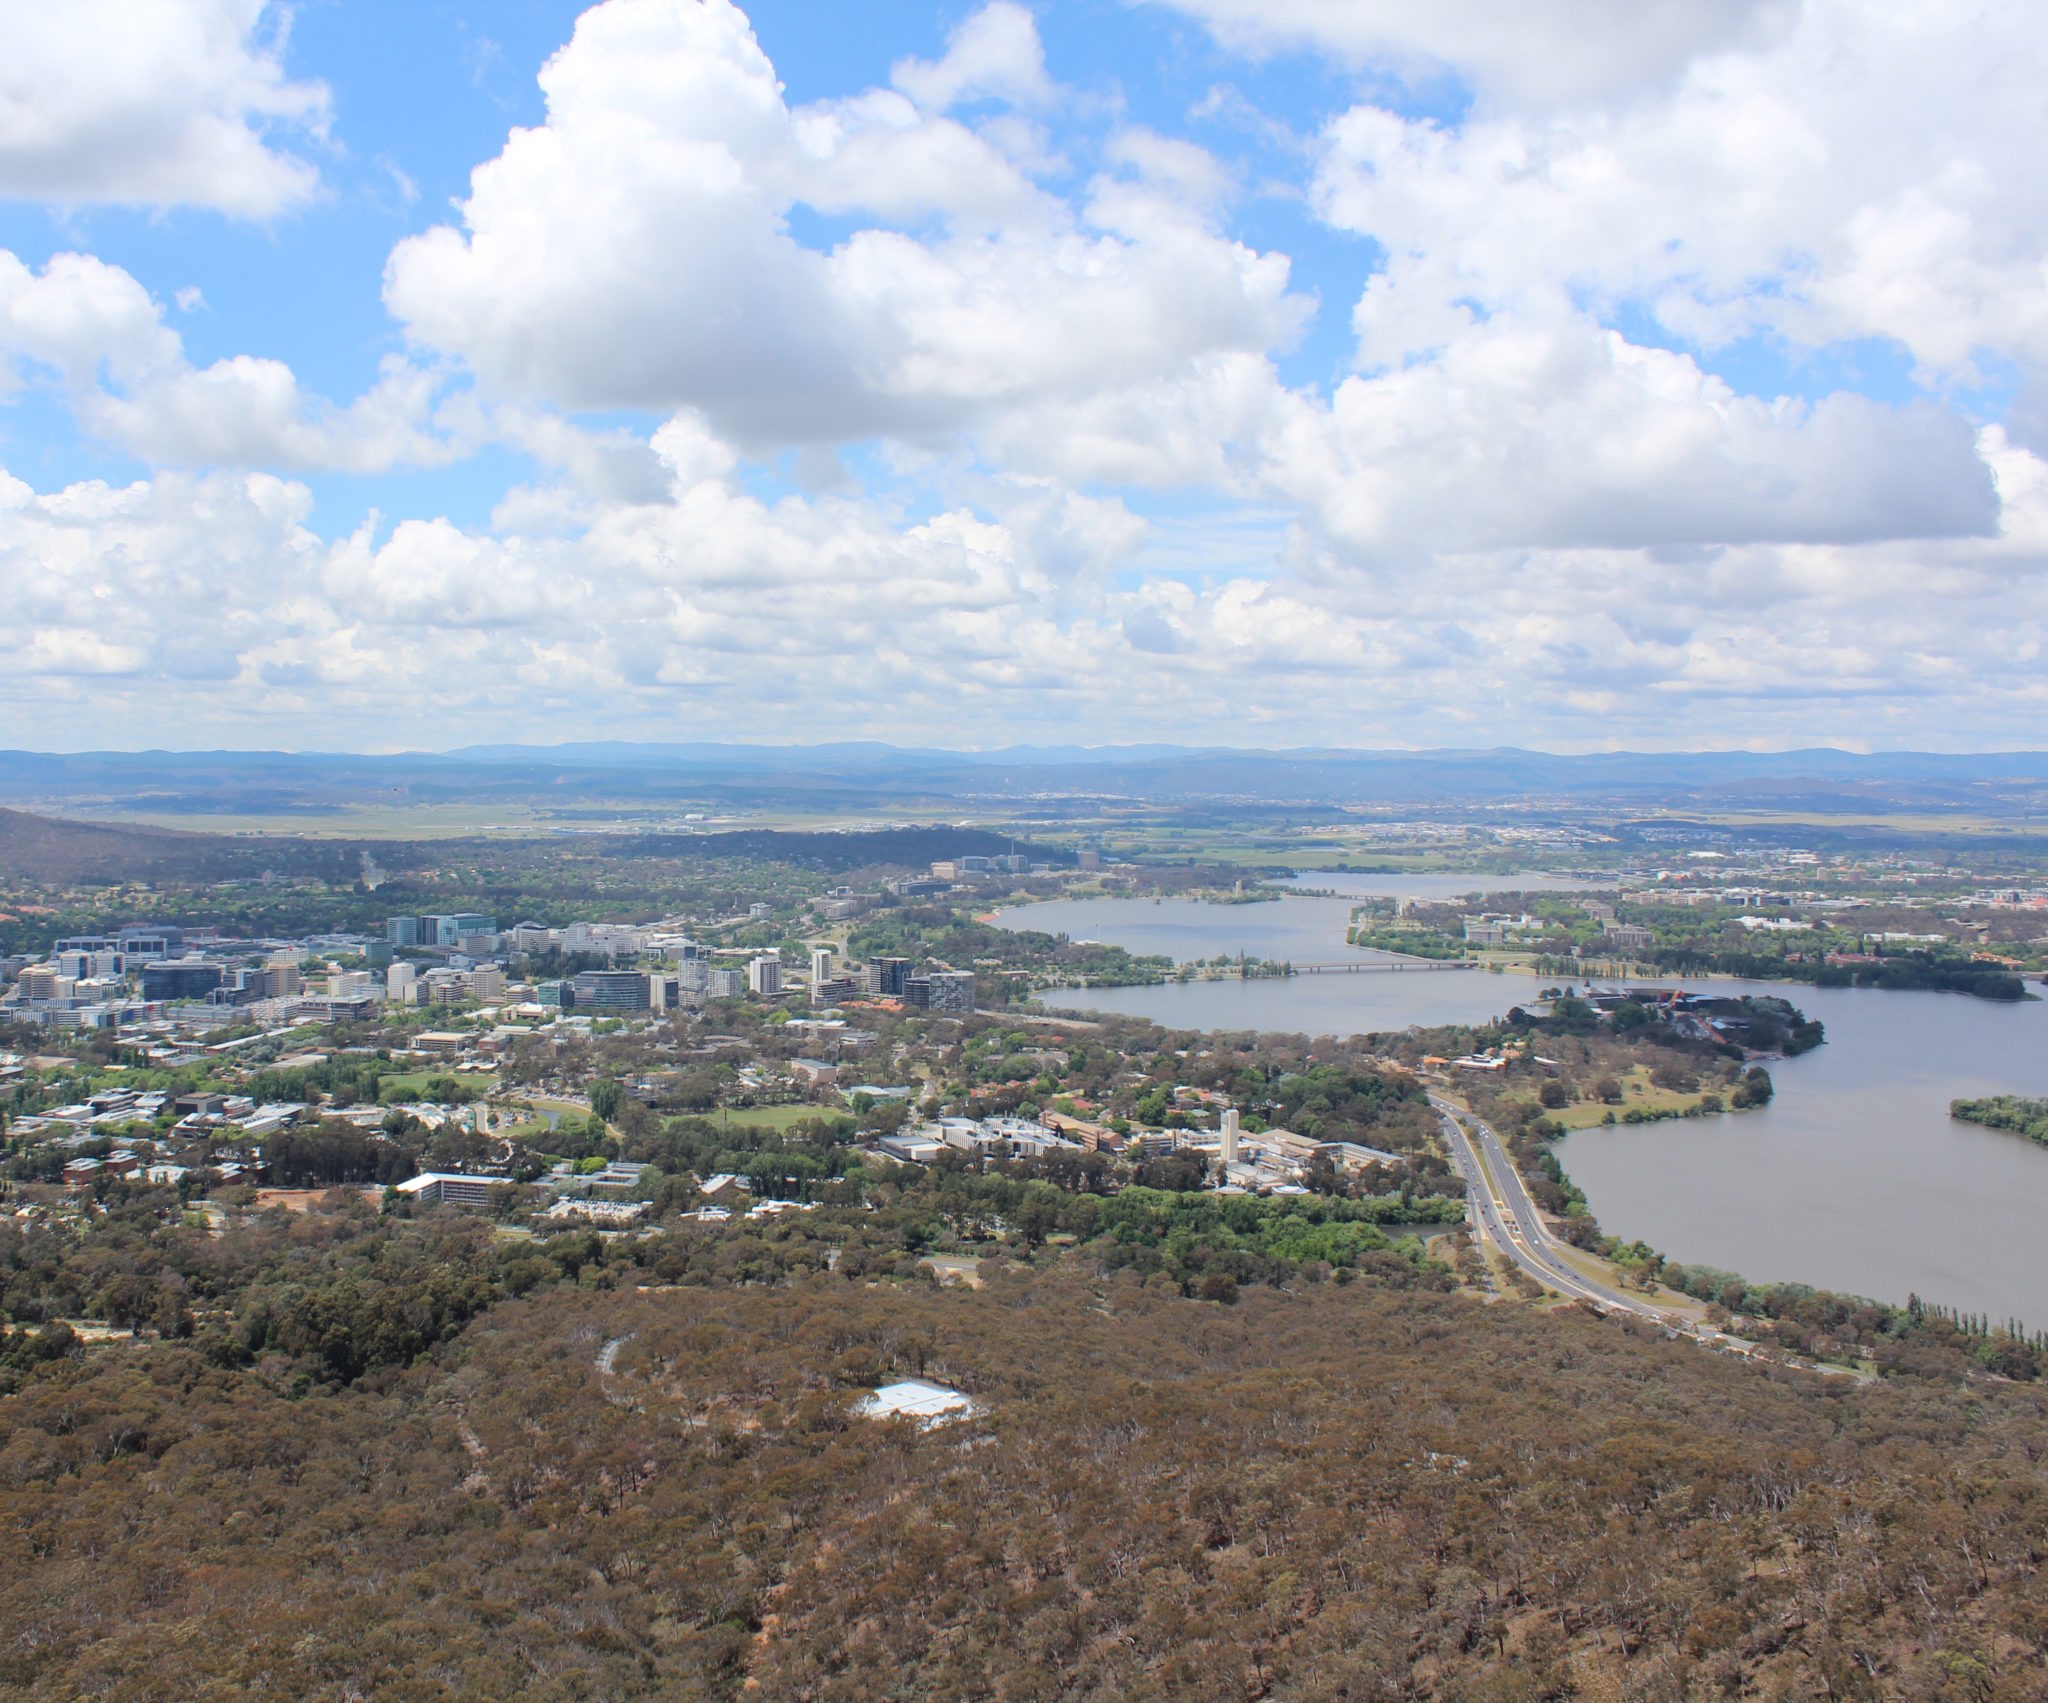 Getting high in Canberra